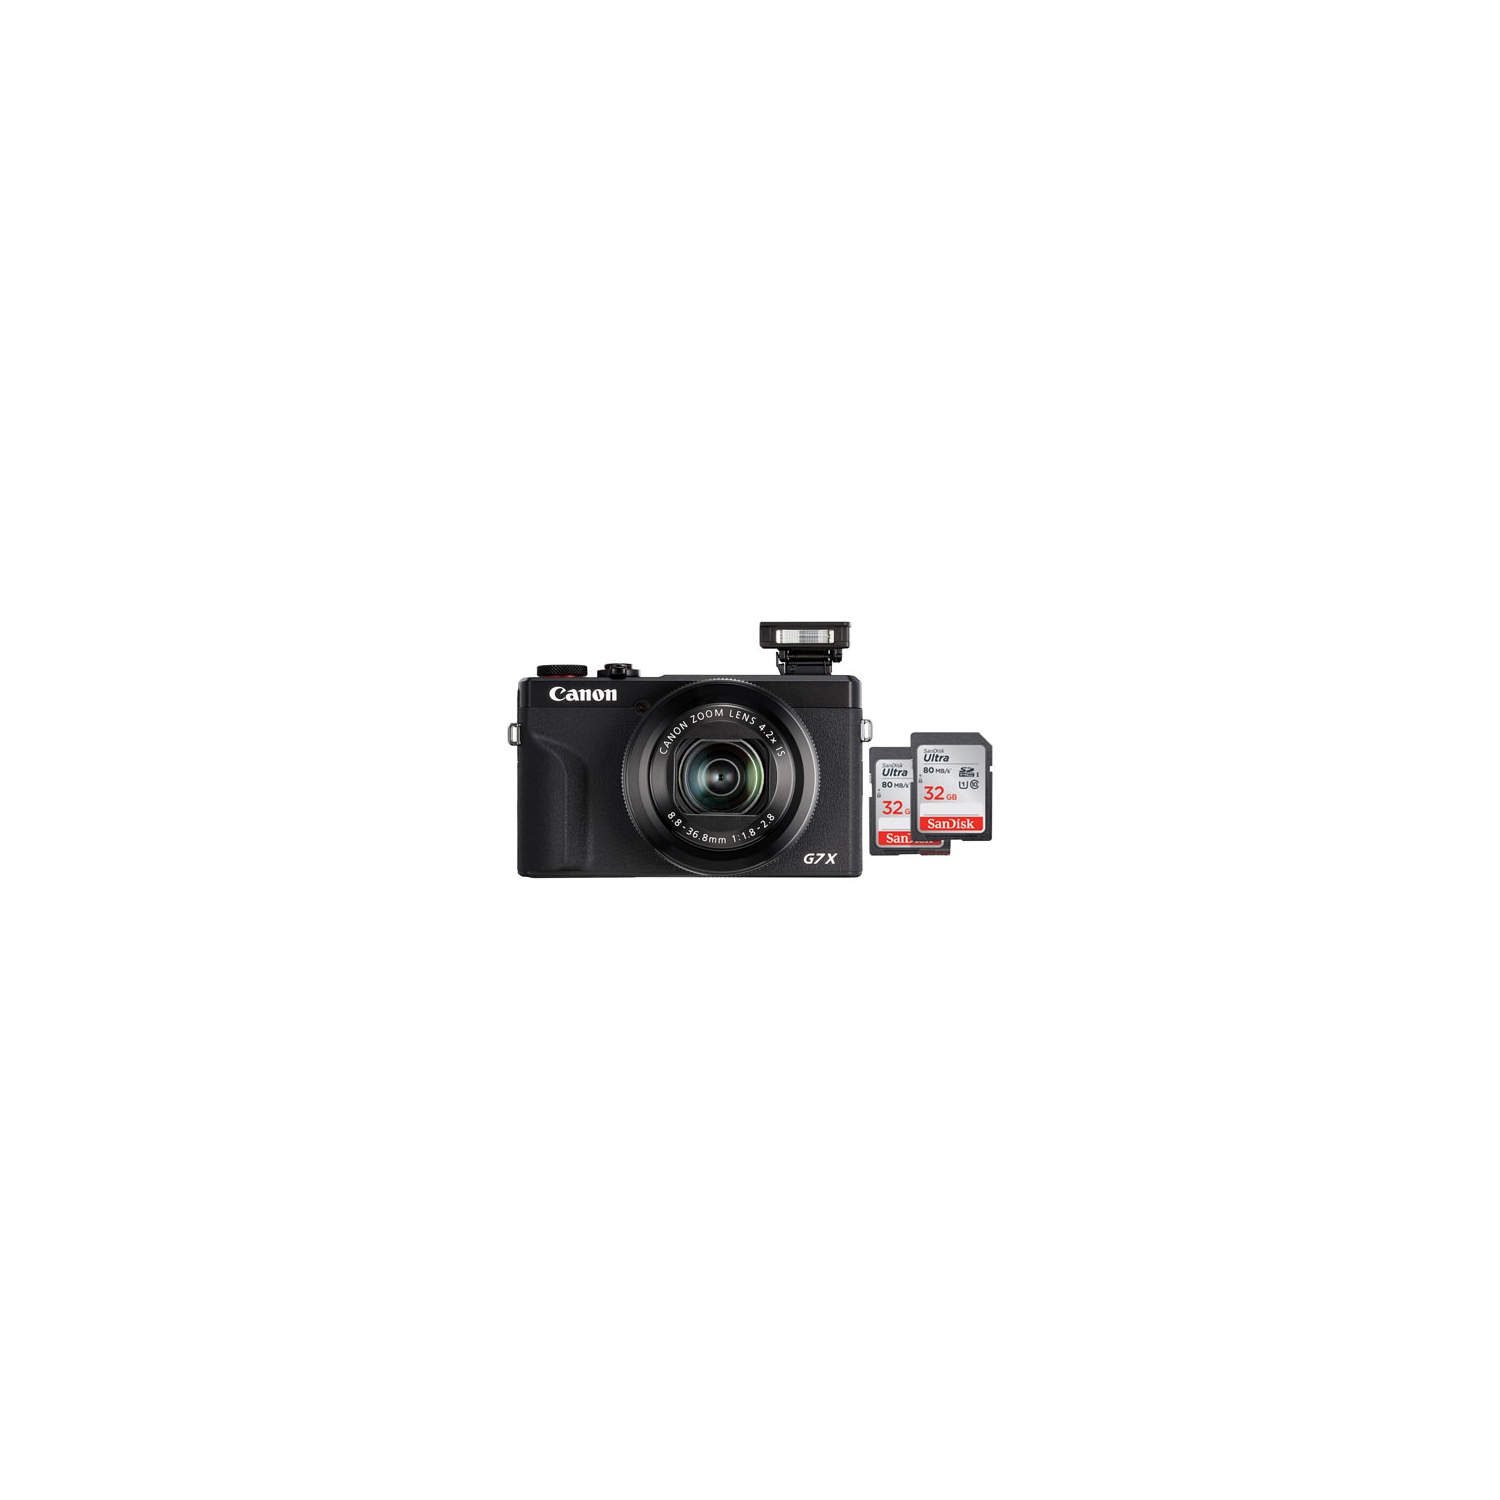 Refurbished (Excellent) - Canon PowerShot G7 X Mark III Wi-Fi 20.1MP Digital Camera with 2 32GB Memory Cards - Black